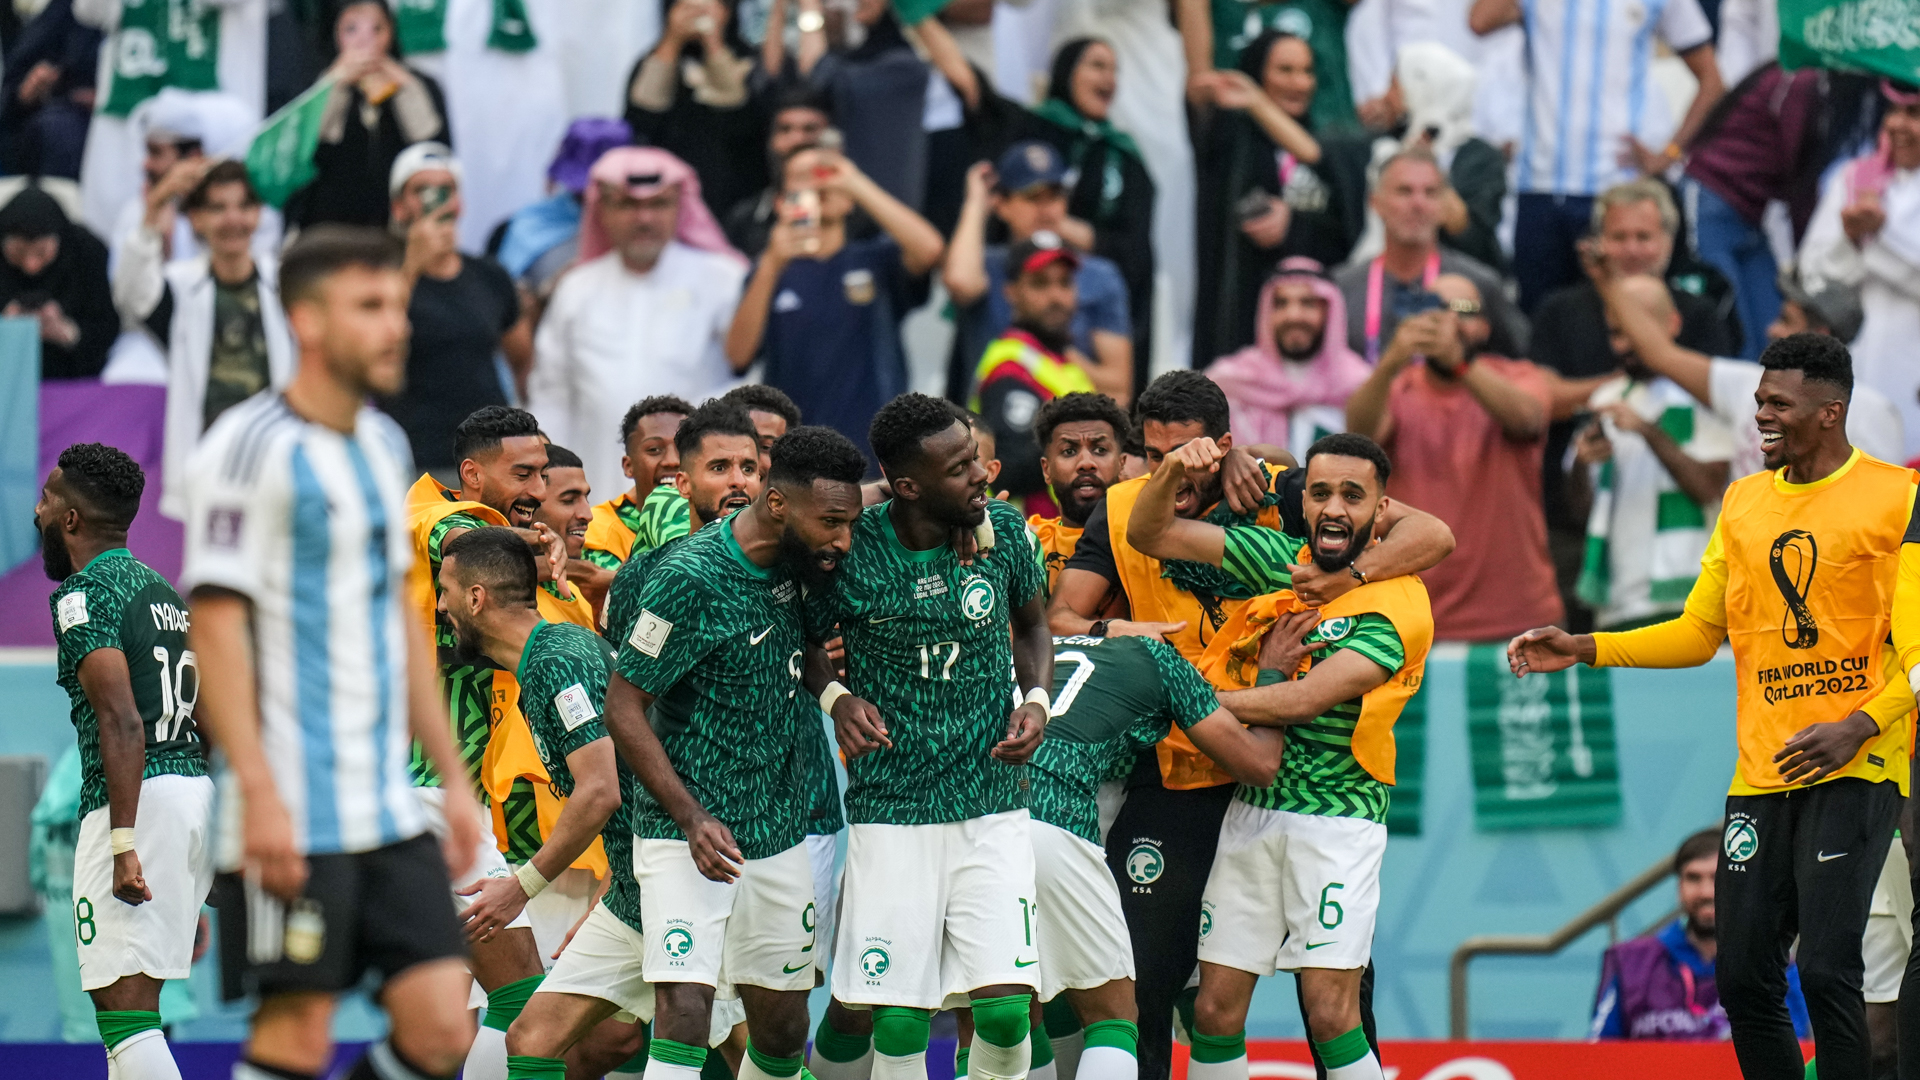 World Cup Soccer: Saudi Arabia gifts Rolls Royce Phantom to players for  beating Argentina; U.S holds England to a scoreless draw